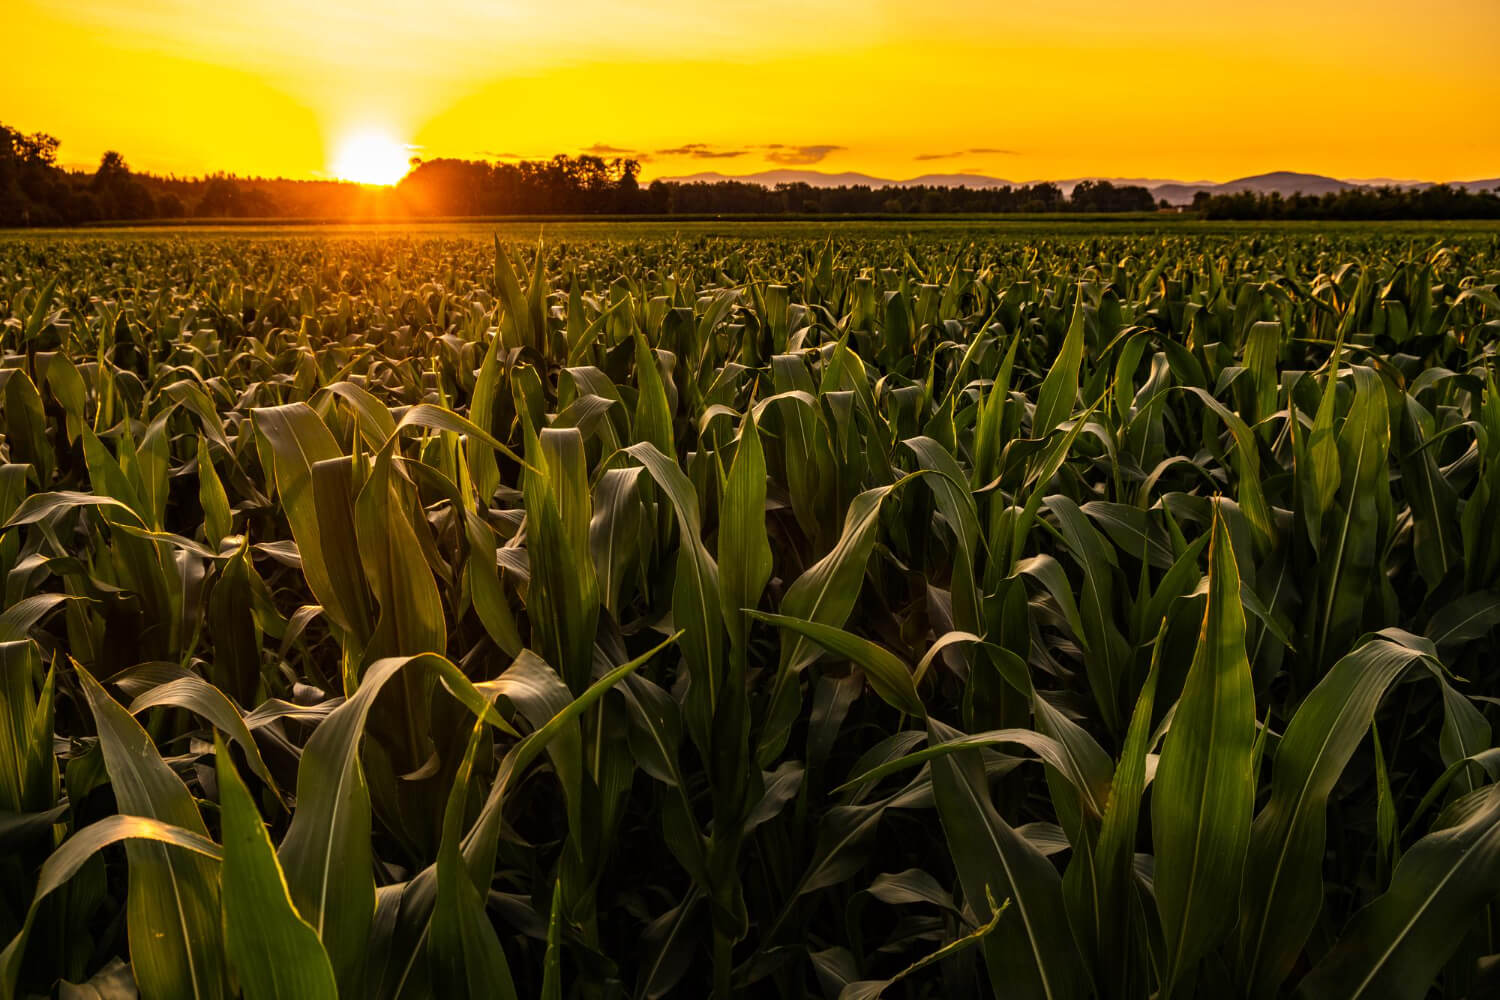 young-maize-plants-in-sunset-light-corn-field-background